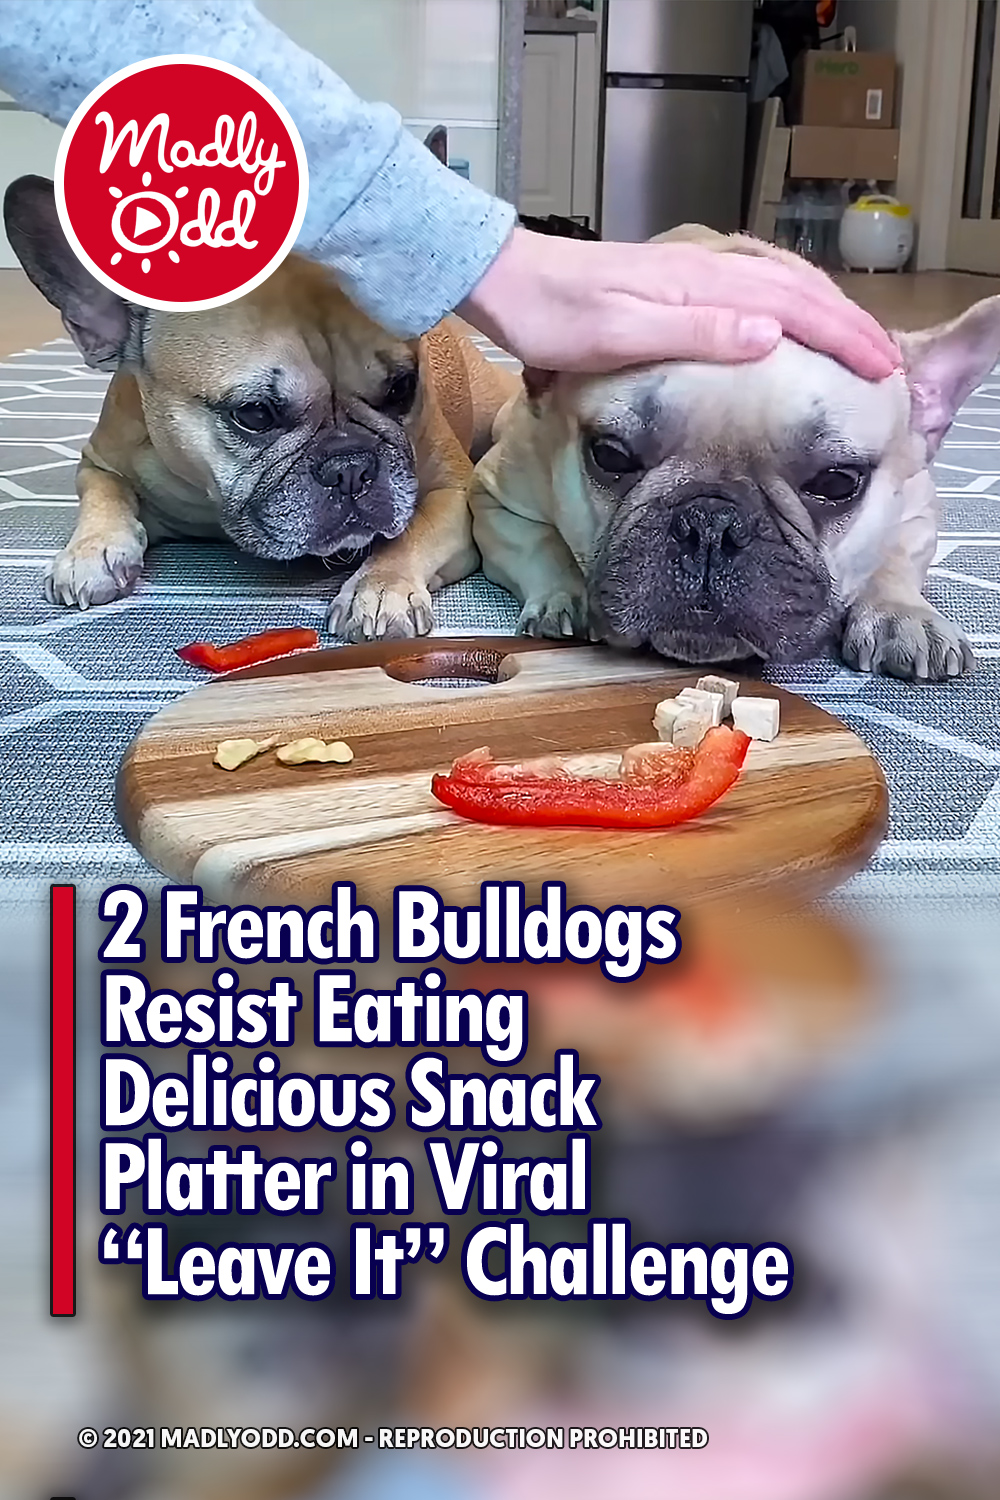 2 French Bulldogs Resist Eating Delicious Snack Platter in Viral “Leave It” Challenge